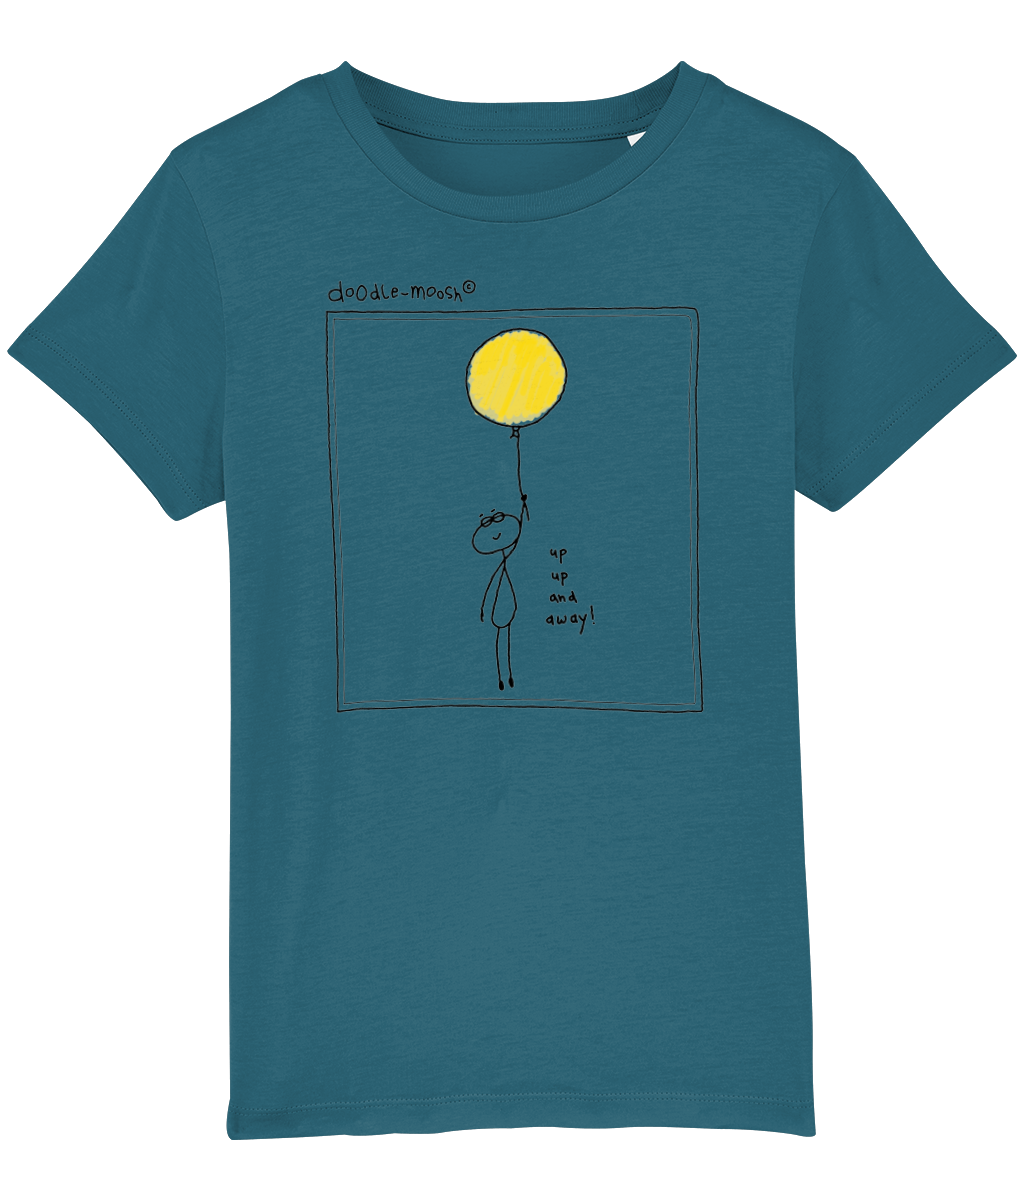 Up up and away t-shirt, blue with black, colourful drawing